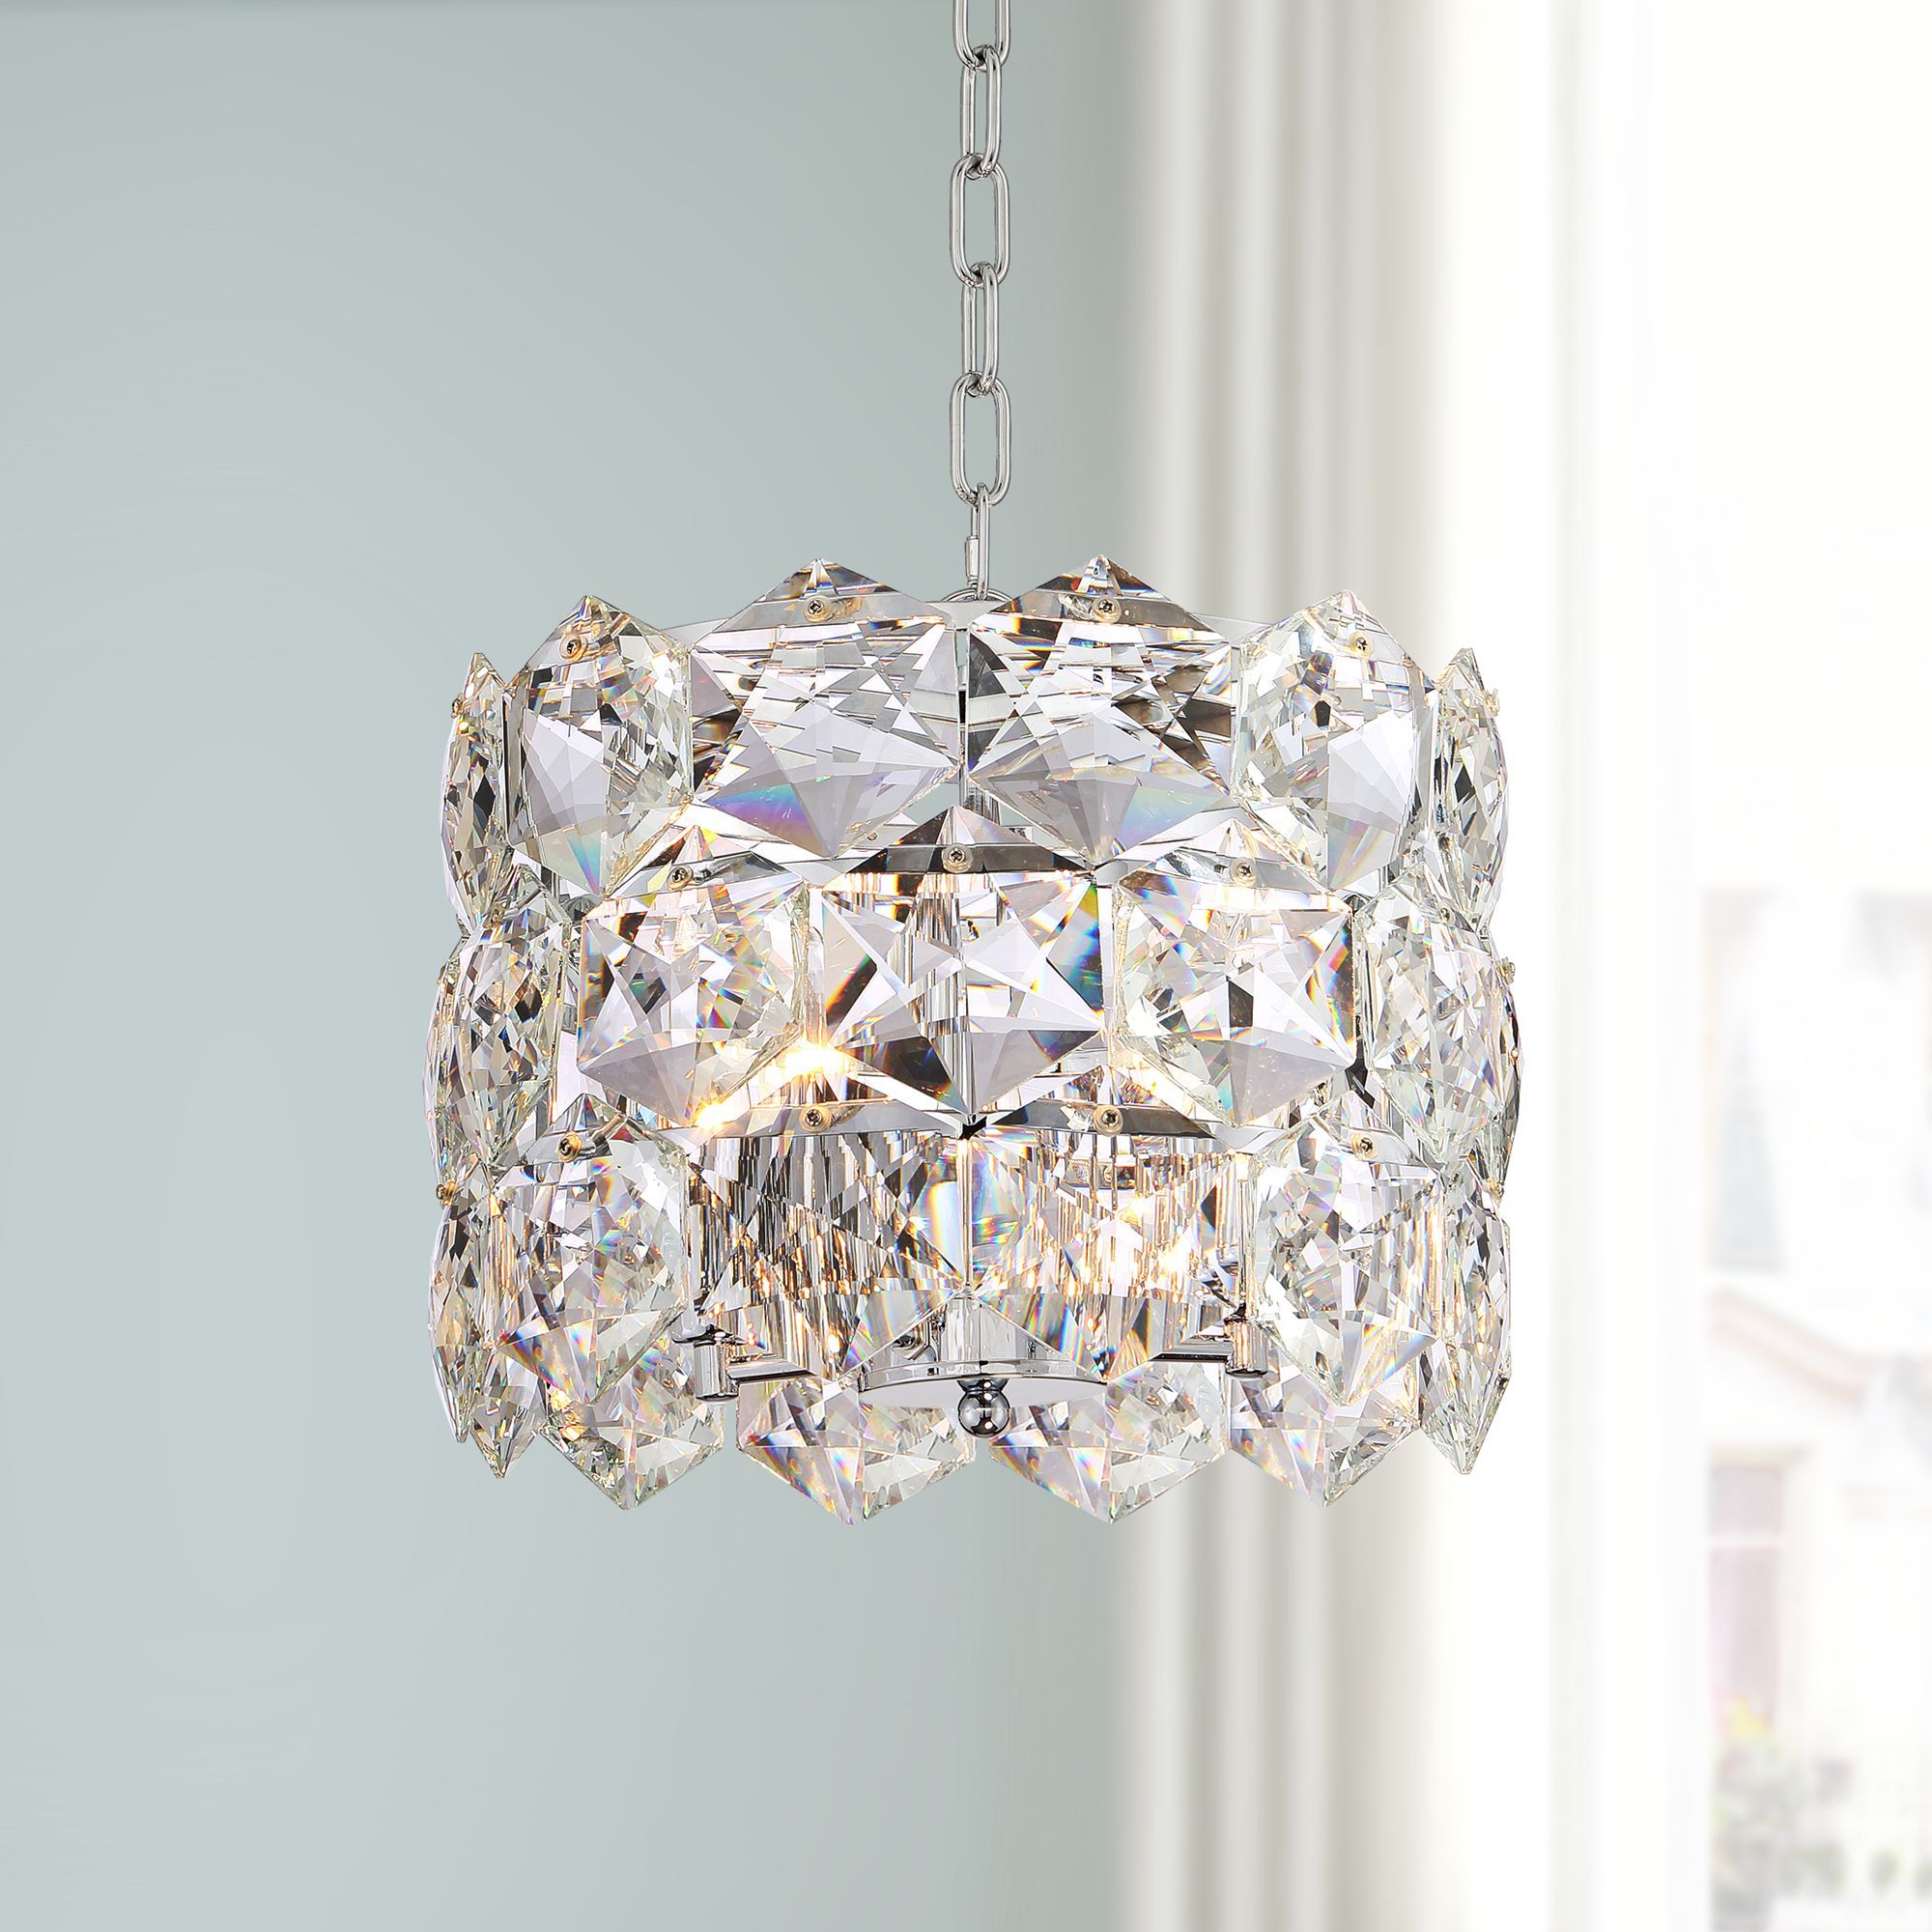 Fashionable Glass And Chrome Modern Chandeliers Intended For Vienna Full Spectrum Chrome Crystal Pendant Chandelier  (View 4 of 20)